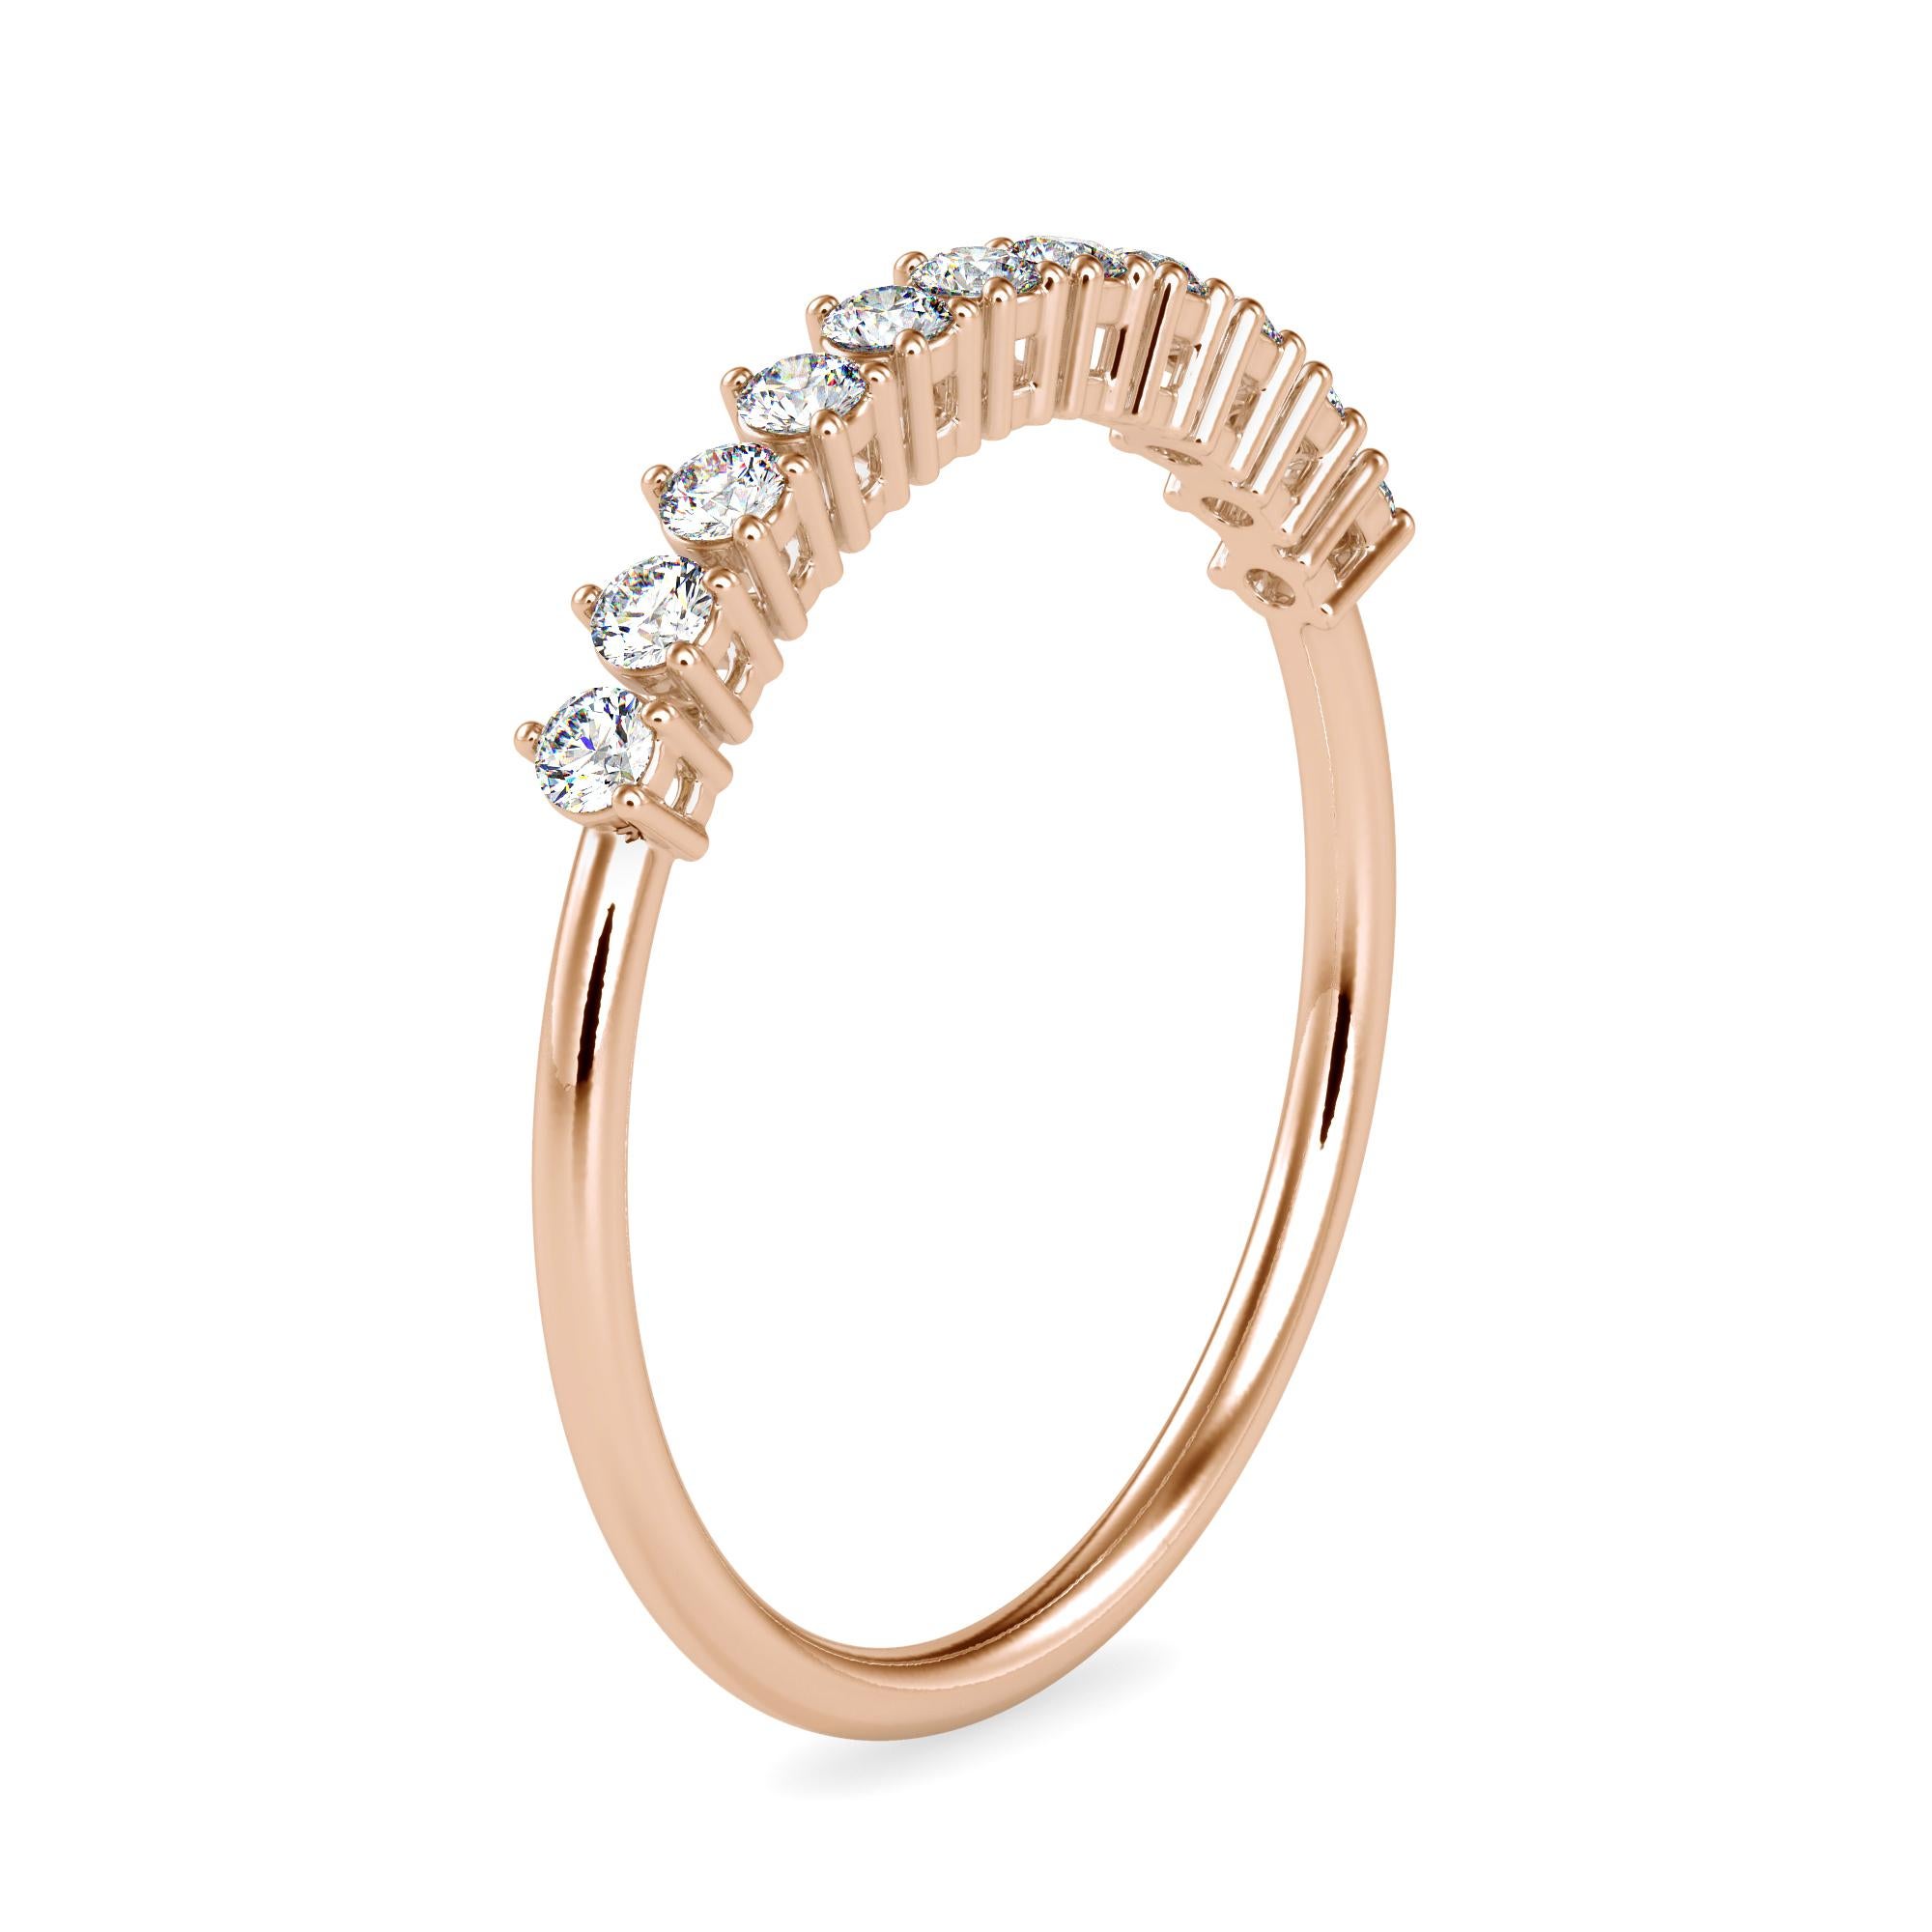 0.24 Carat Diamond 14K Rose Gold Ring In New Condition For Sale In Los Angeles, CA